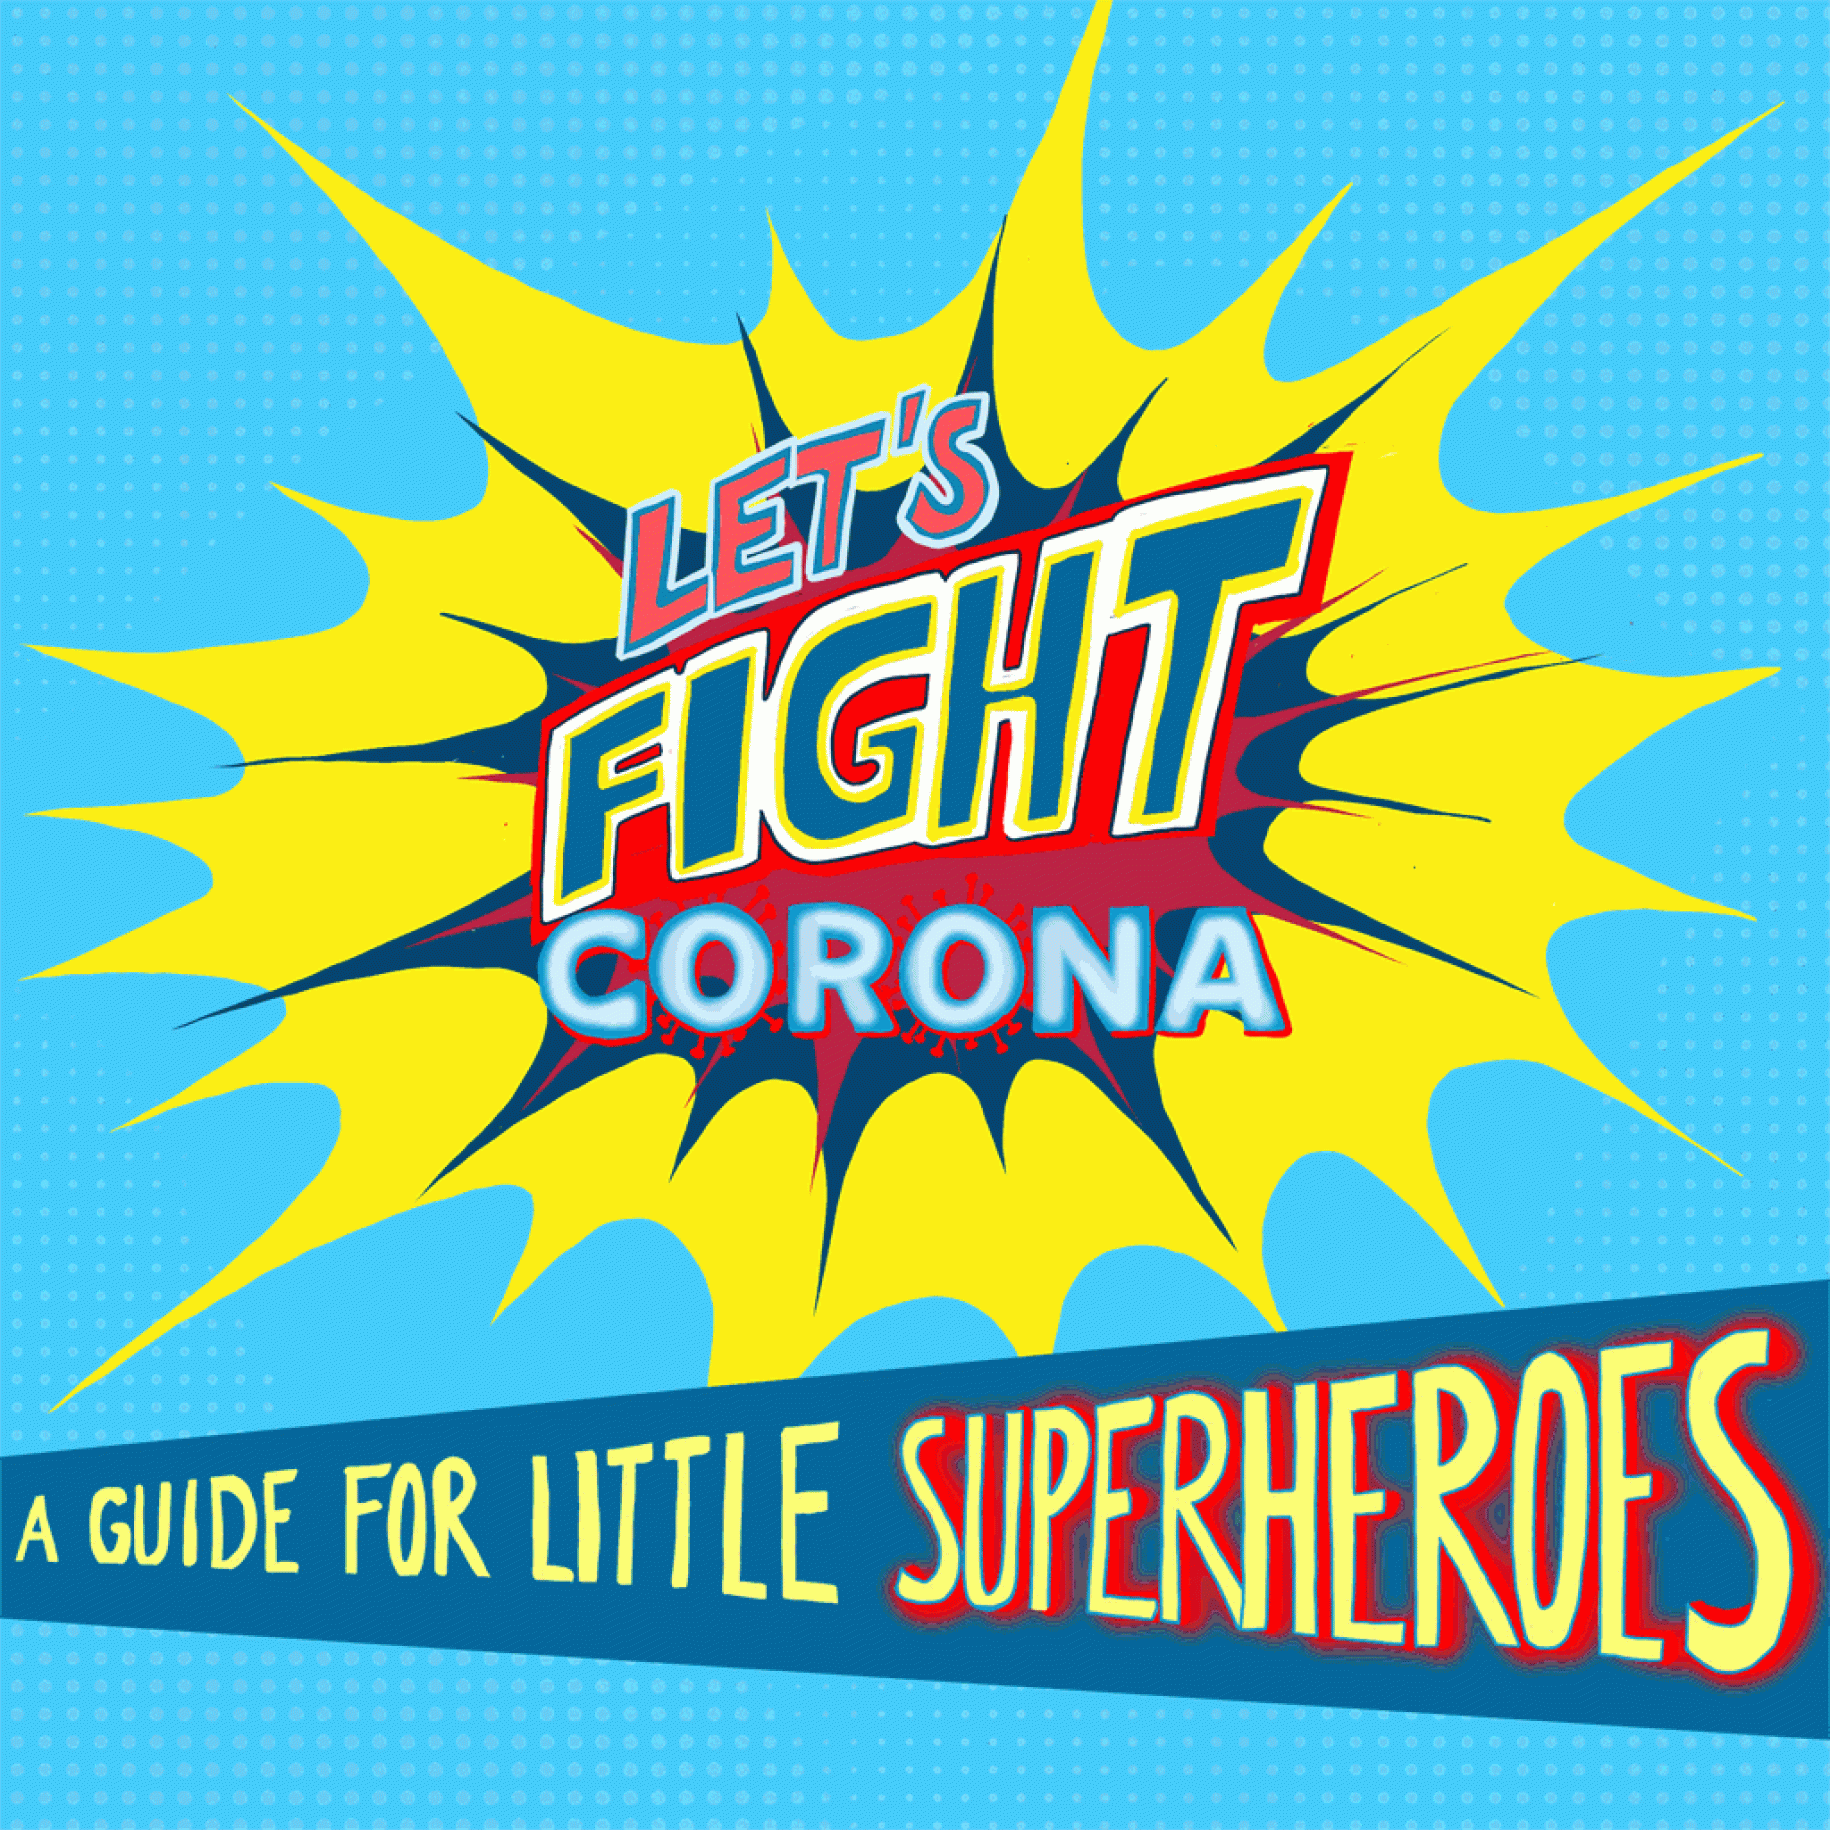  Let’s Fight Corona! Comic images.